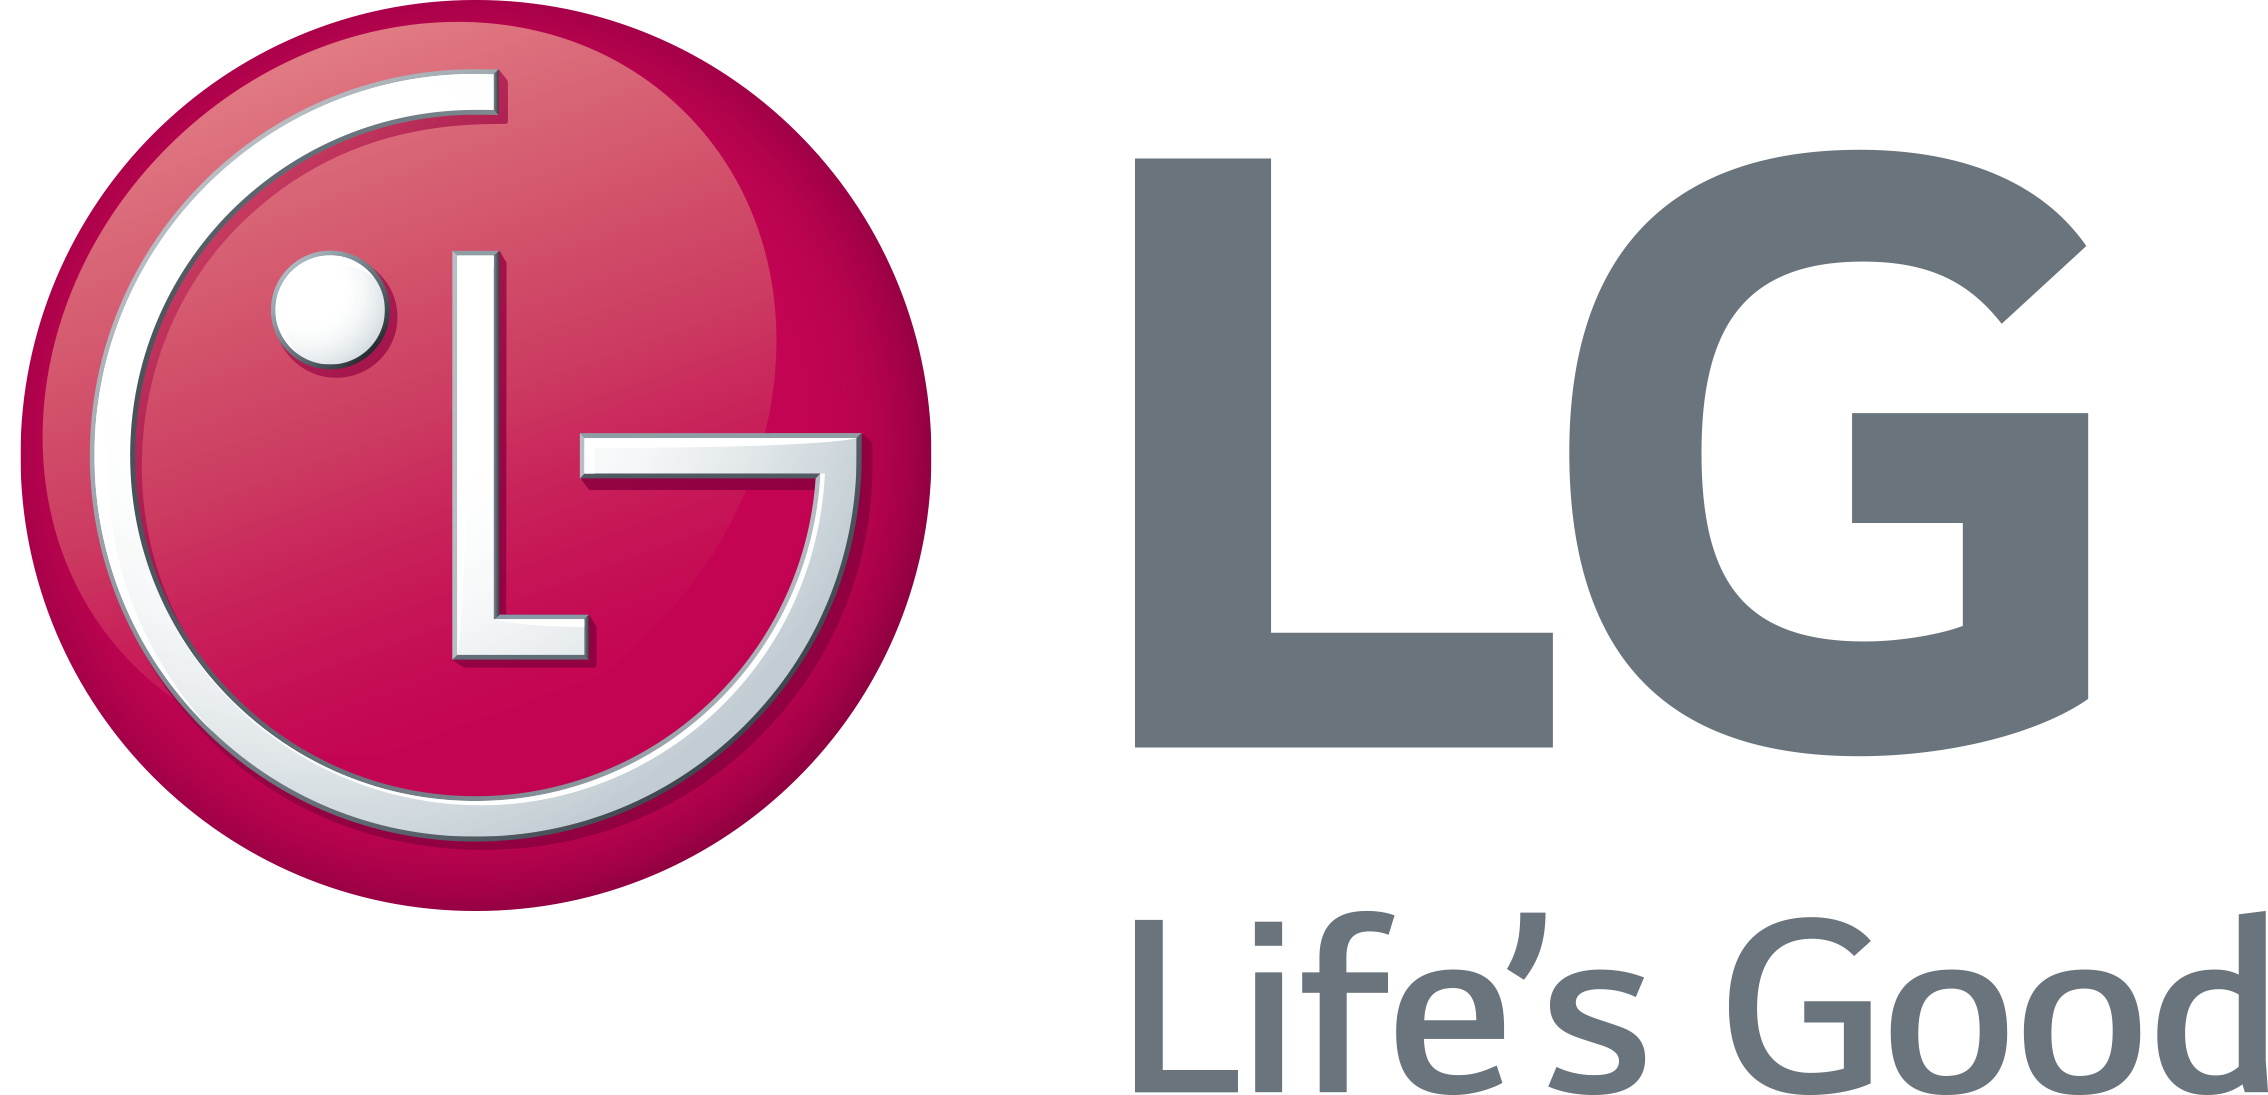 LG offers financial stability